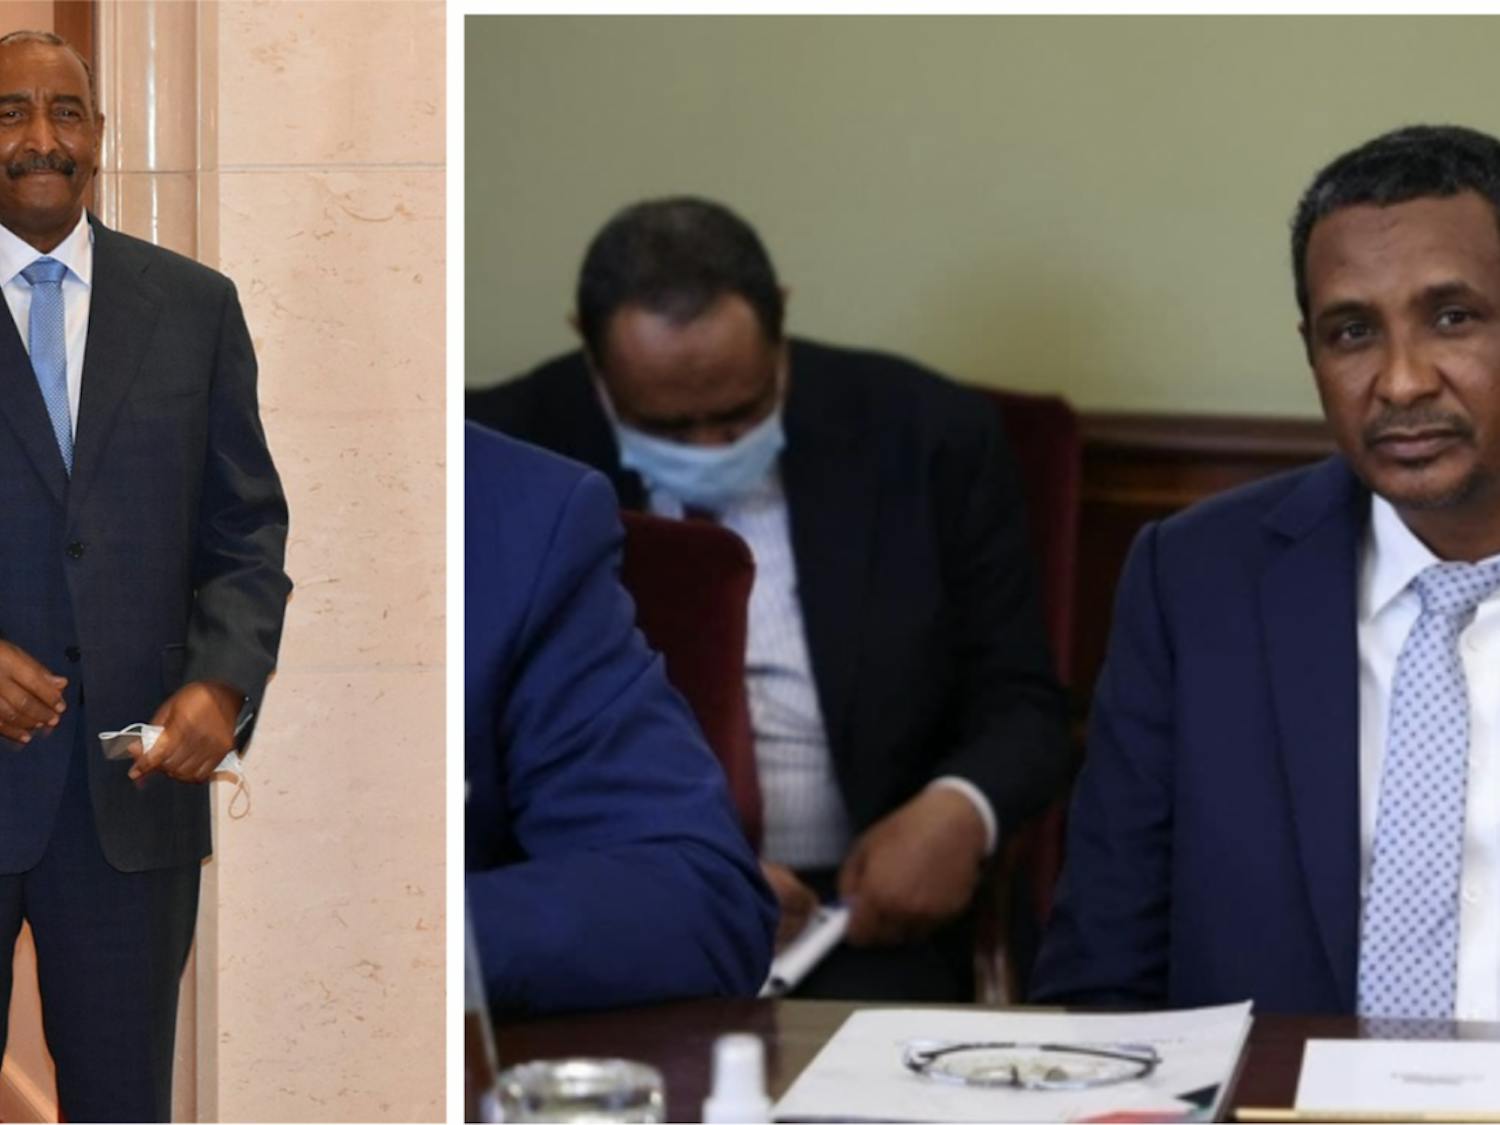 Sudan’s military forces broadly support General Abdel Fattah al-Burhan, the country’s de facto ruler, while the country’s main paramilitary force, the Rapid Support Forces (RSF) are loyal to the former warlord General Mohamed Hamdan Dagalo (Photos courtesy of Wikimedia Commons/Left: “Secretary Pompeo Meets with Sudanese Sovereign Council Chair General Fattah el-Burhan” by U.S. Department of State. August 25, 2020. Right: “General Mohamed Hamdan Dagalo” by Russian Government. February 25, 2022). 